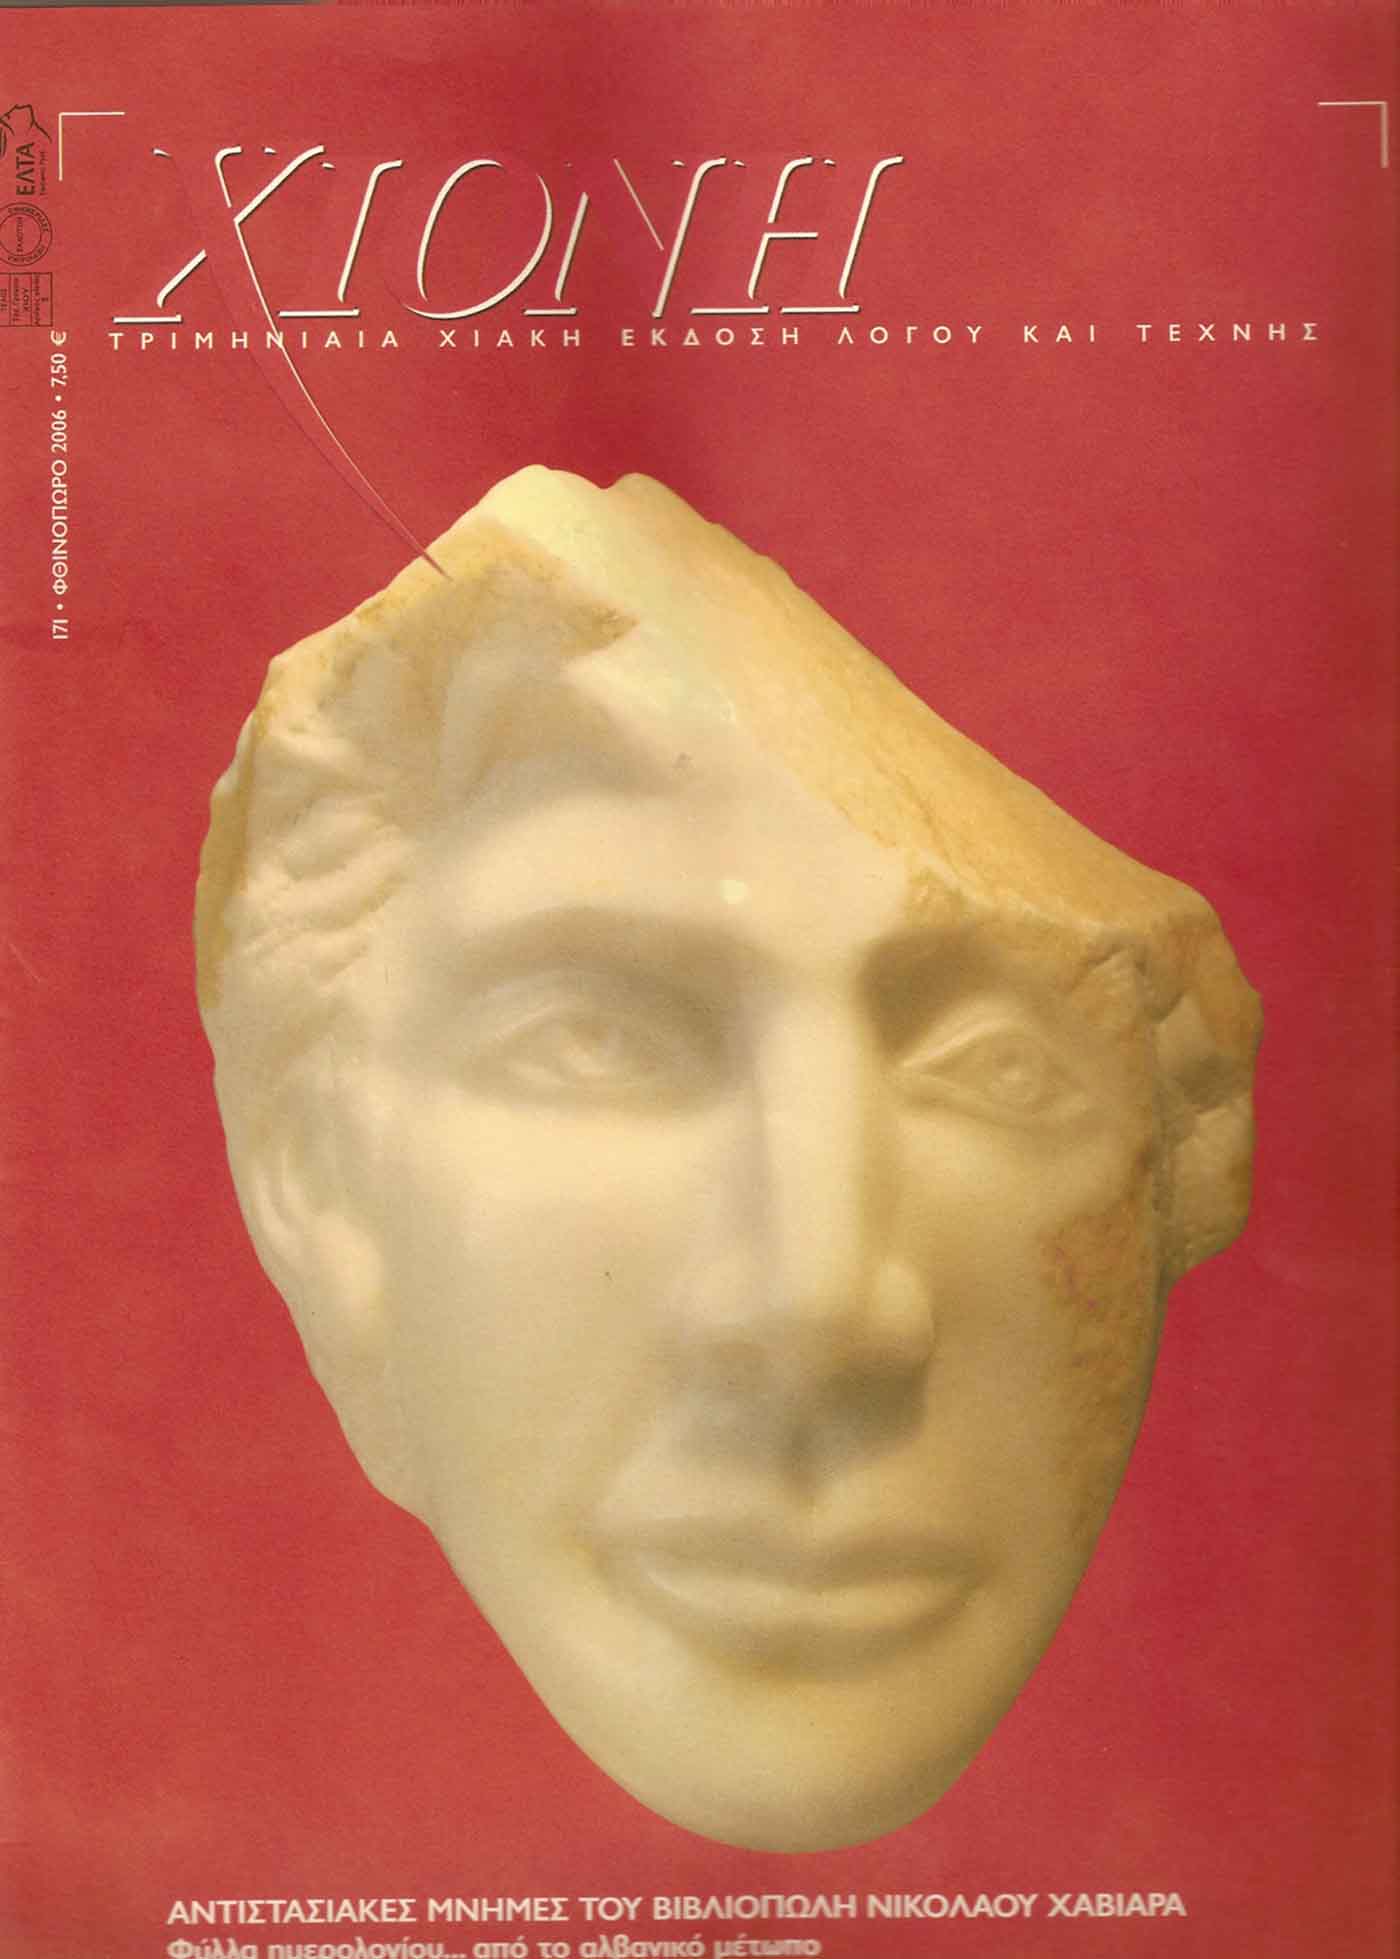 'Hioni' magazine with a sculpture by A. Varrias on the cover